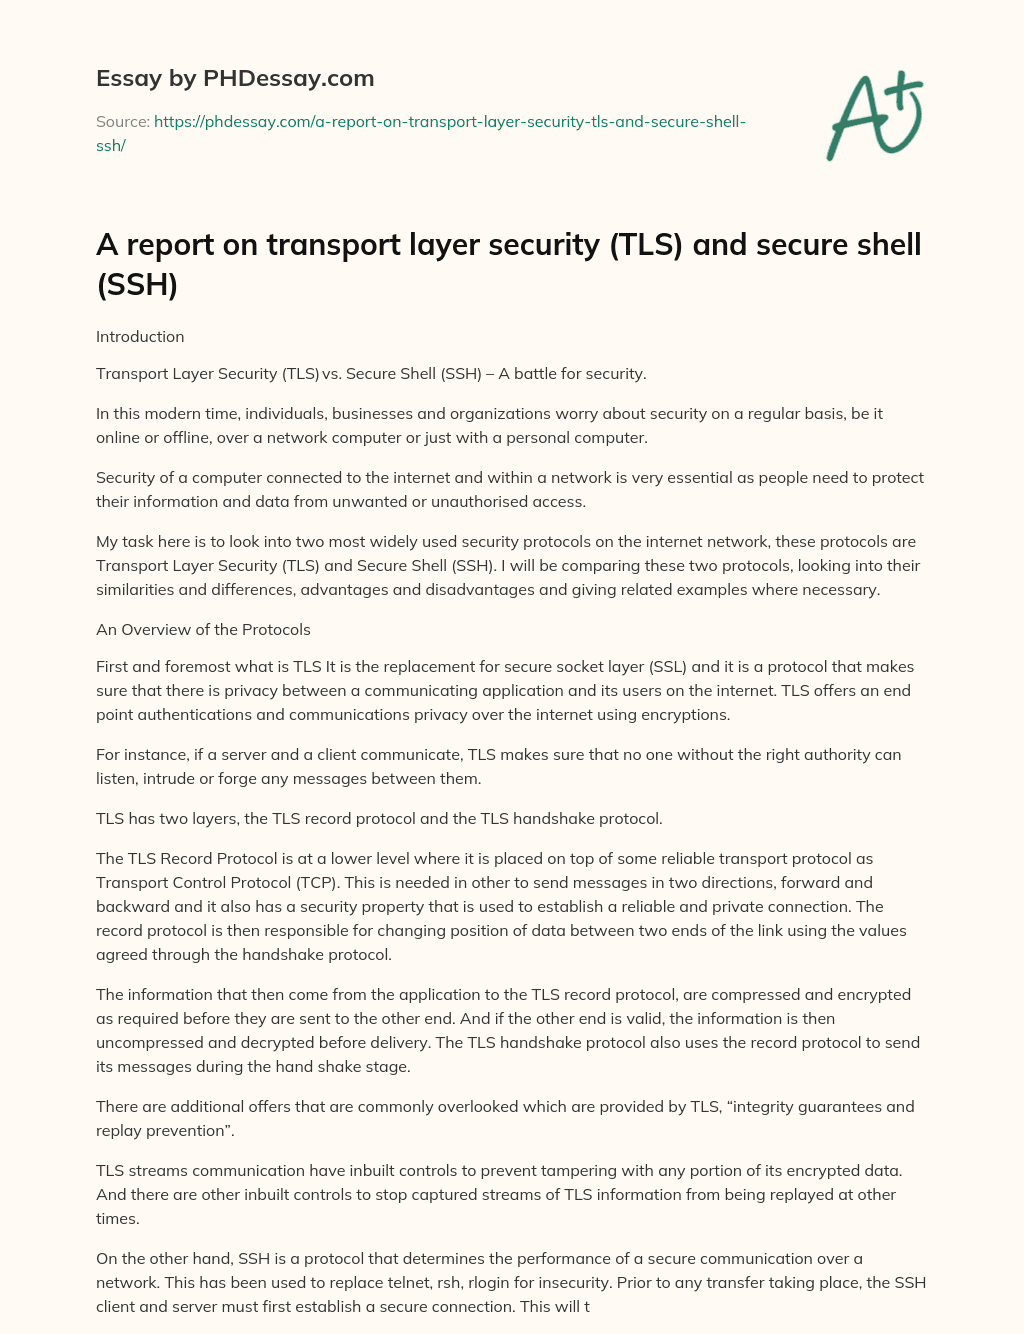 A report on transport layer security (TLS) and secure shell (SSH) essay